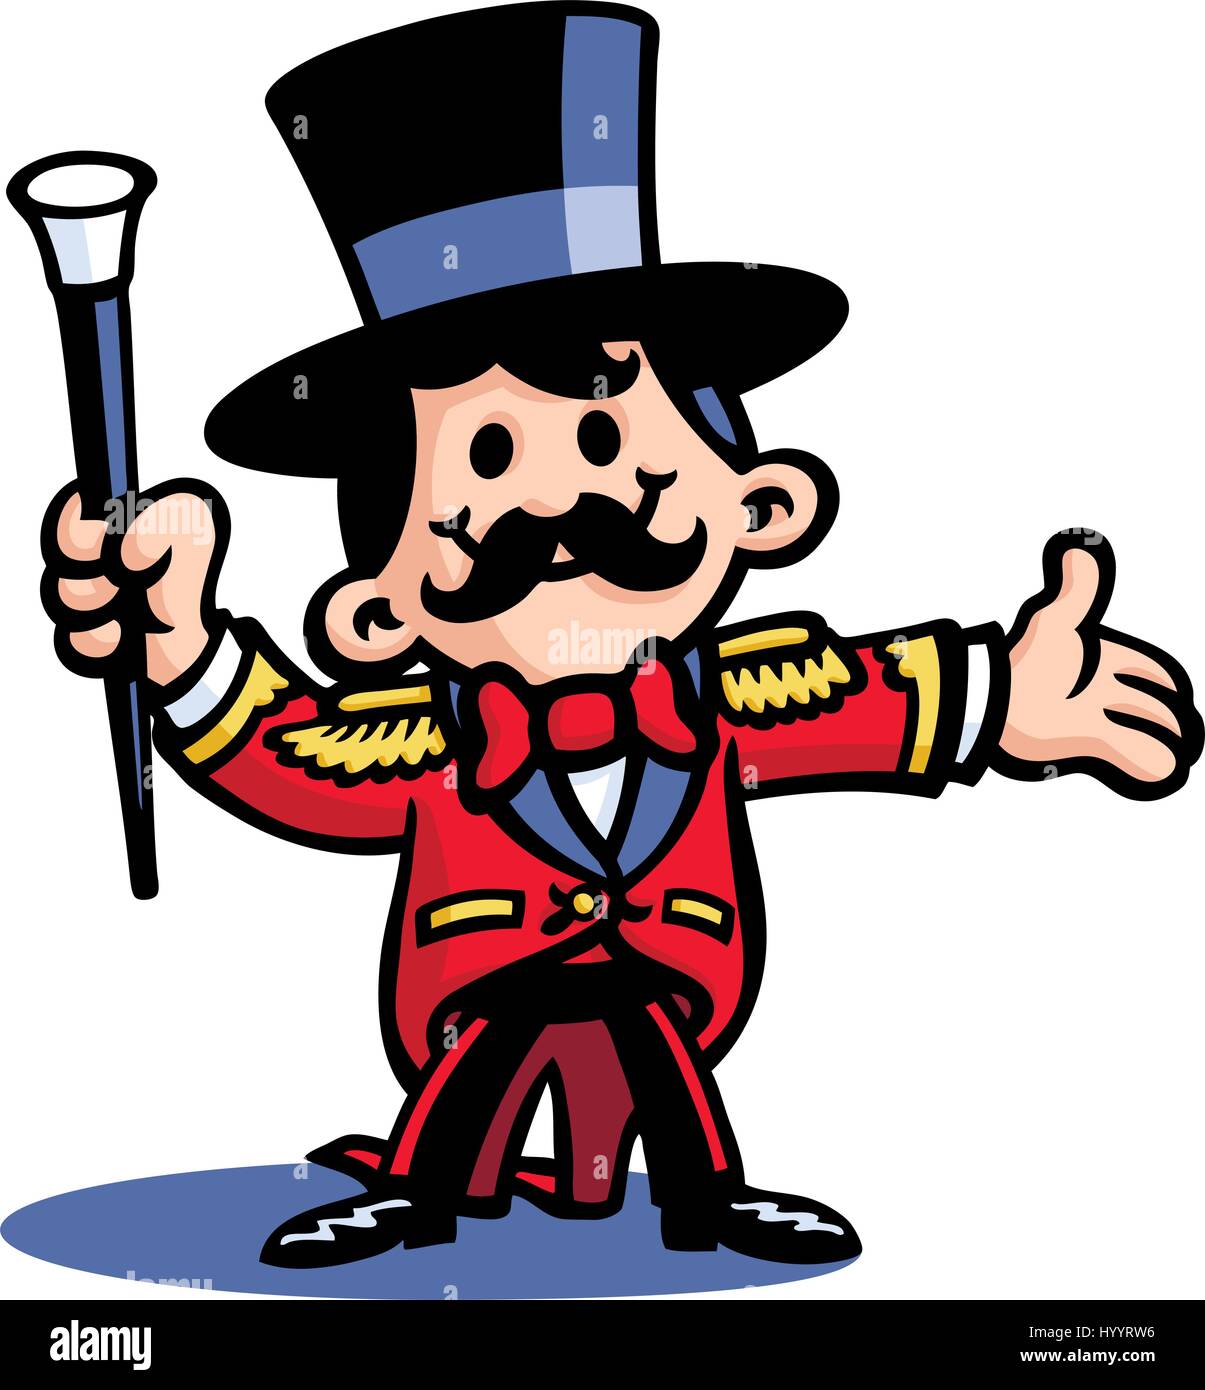 Ringmaster Stock Vector Images - Alamy